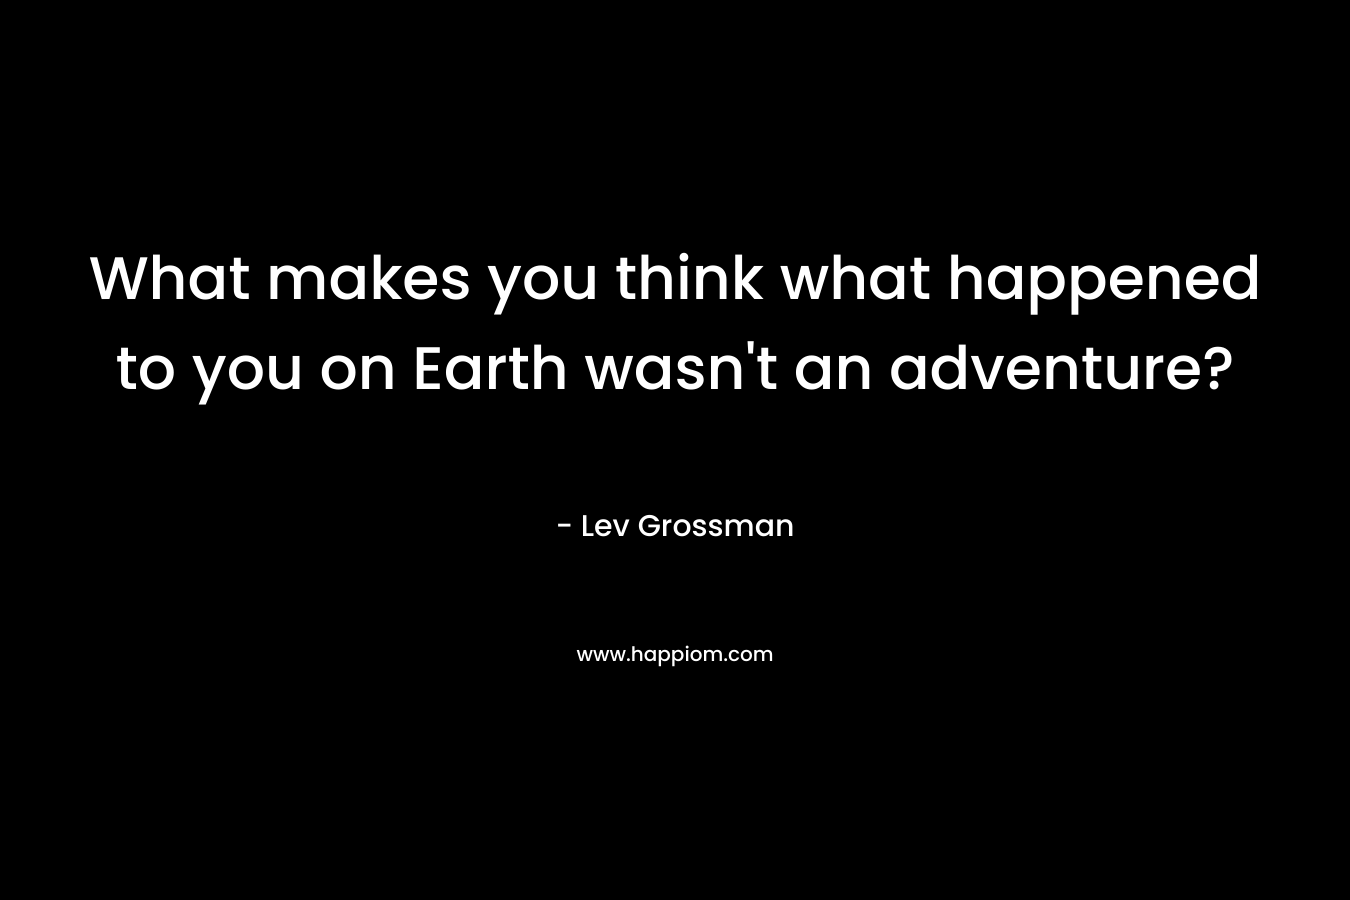 What makes you think what happened to you on Earth wasn't an adventure?